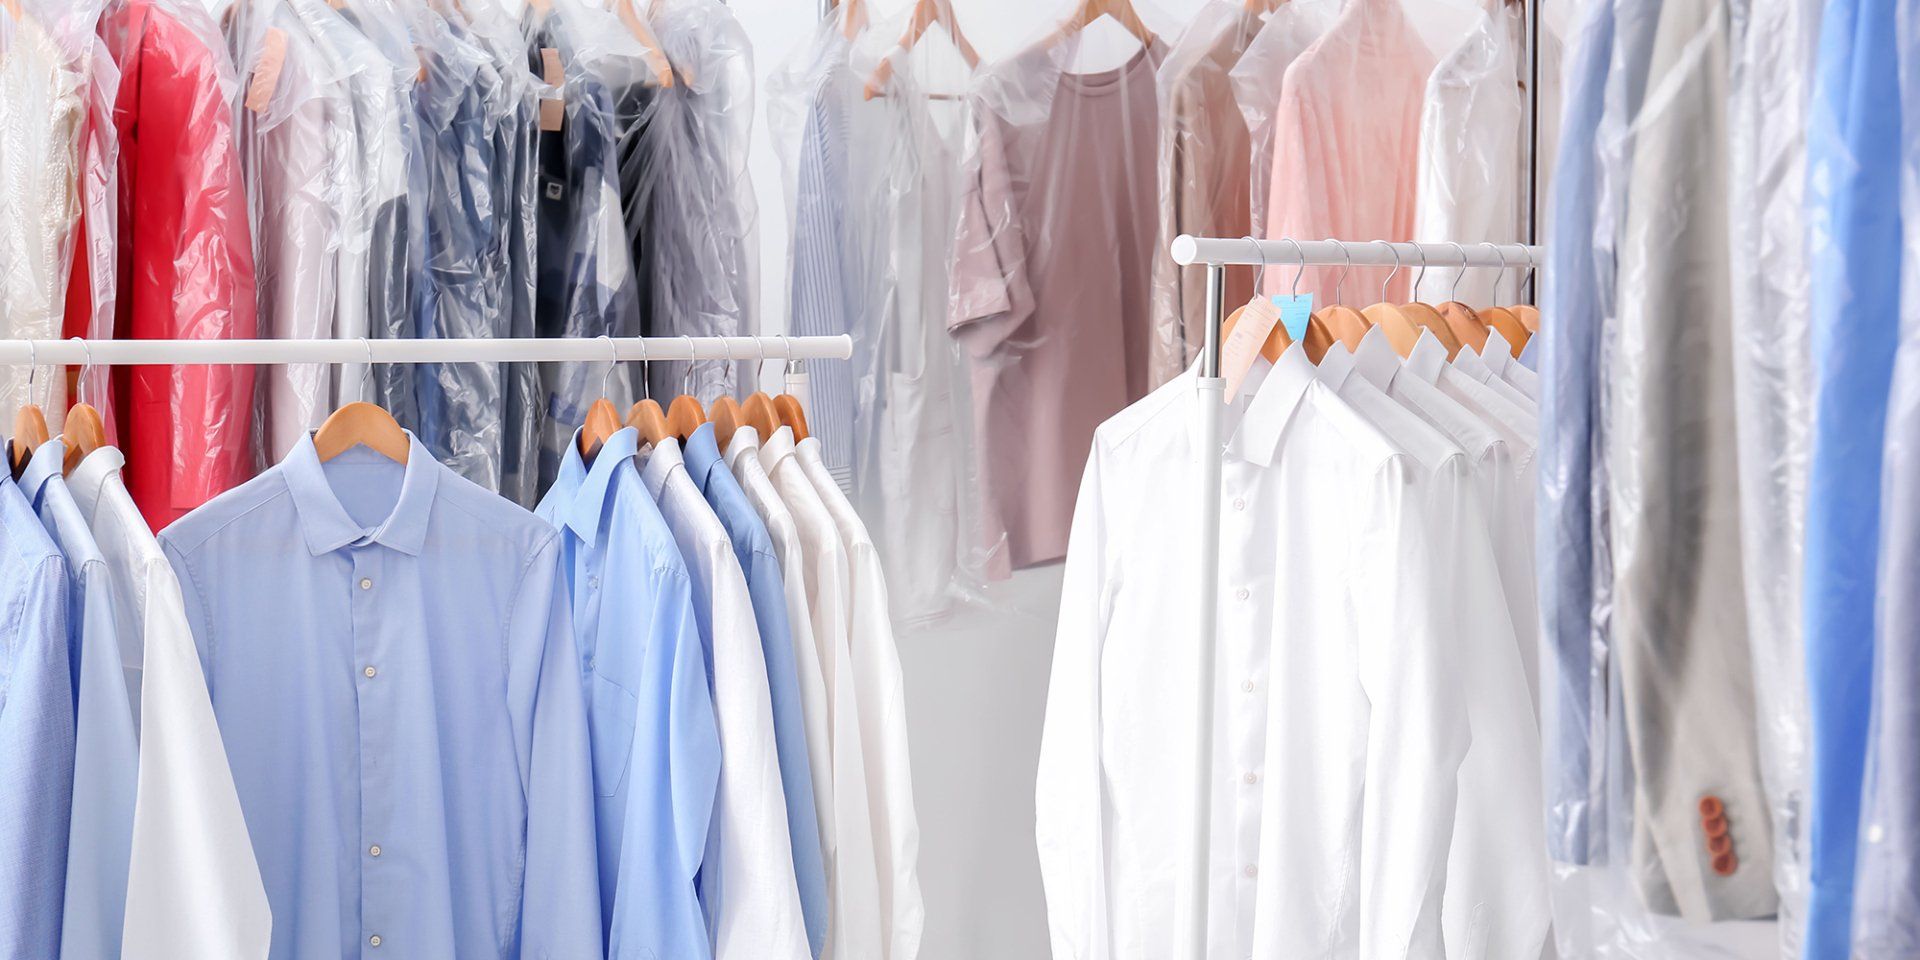 Dry cleaning Manchester